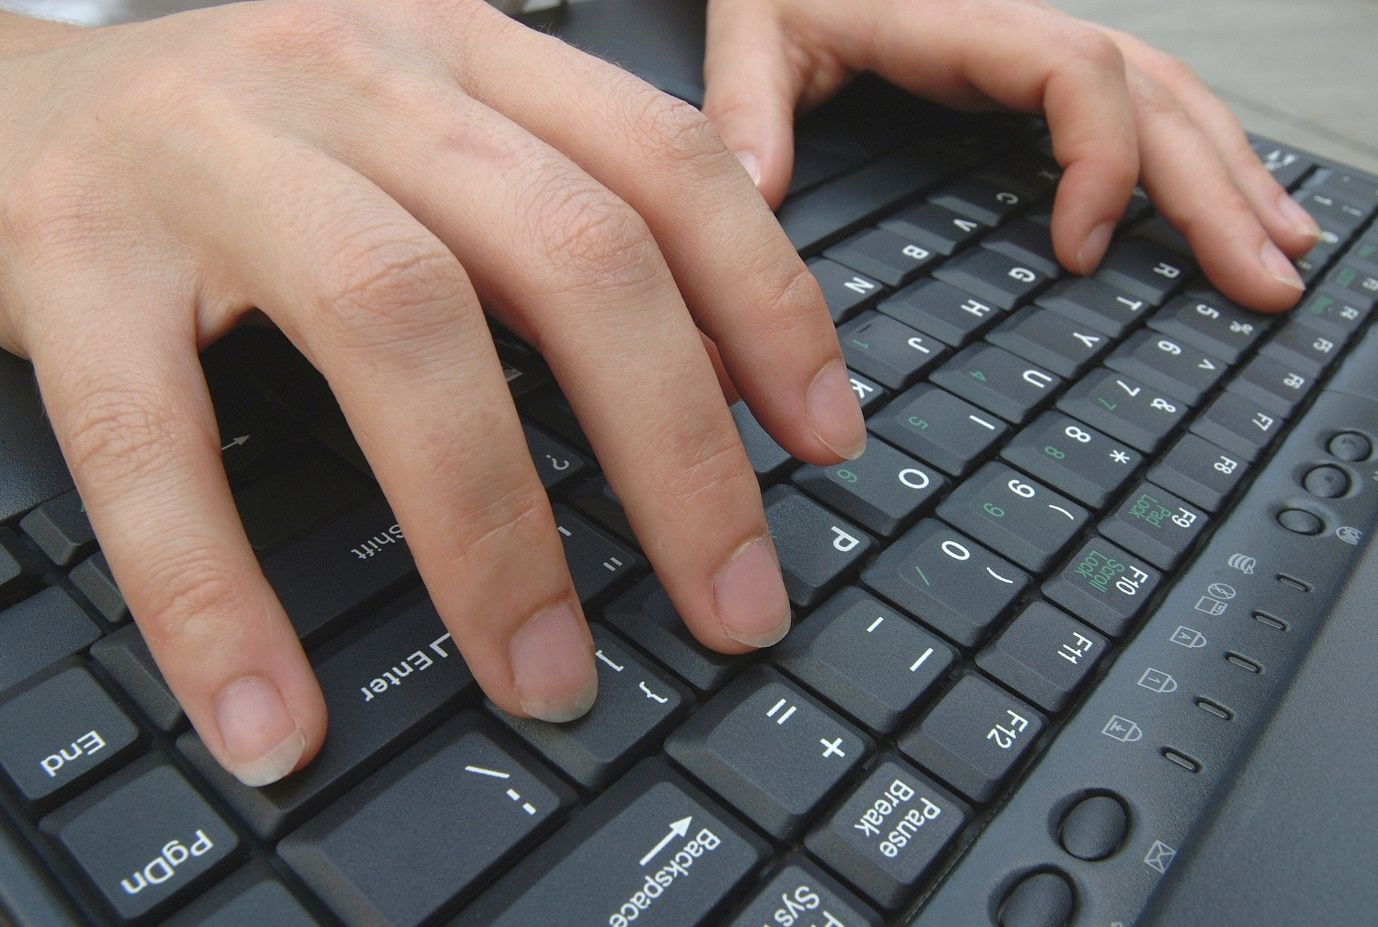 Hands operating a keyboard. Some hackers surf the dark web seeking to acquire or purchase stolen identity information, so they can attempt to use it to break into the owner’s various financial accounts, start new accounts using the owner’s information, and have credit cards sent to an untraceable PO Box address. 